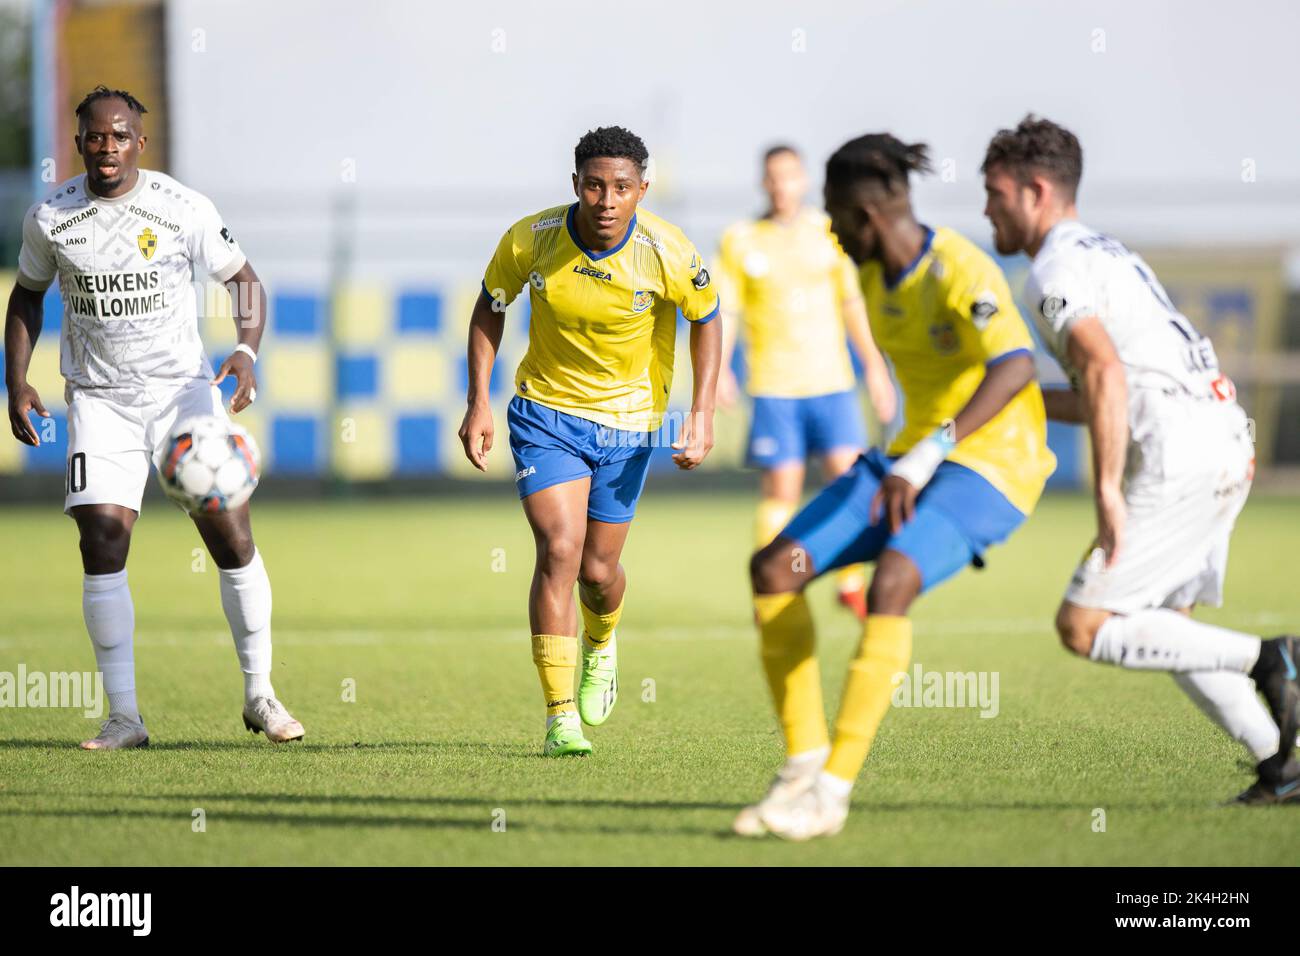 Beveren's Taofeek Ismaheel and Lierse's Brent Laes fight for the ball during a soccer match between SK Beveren and Lierse Kempenzonen, Sunday 02 October 2022 in Beveren-Waas, on day 7 of the 2022-2023 'Challenger Pro League' 1B second division of the Belgian championship. BELGA PHOTO FILIP LANSZWEERT Stock Photo